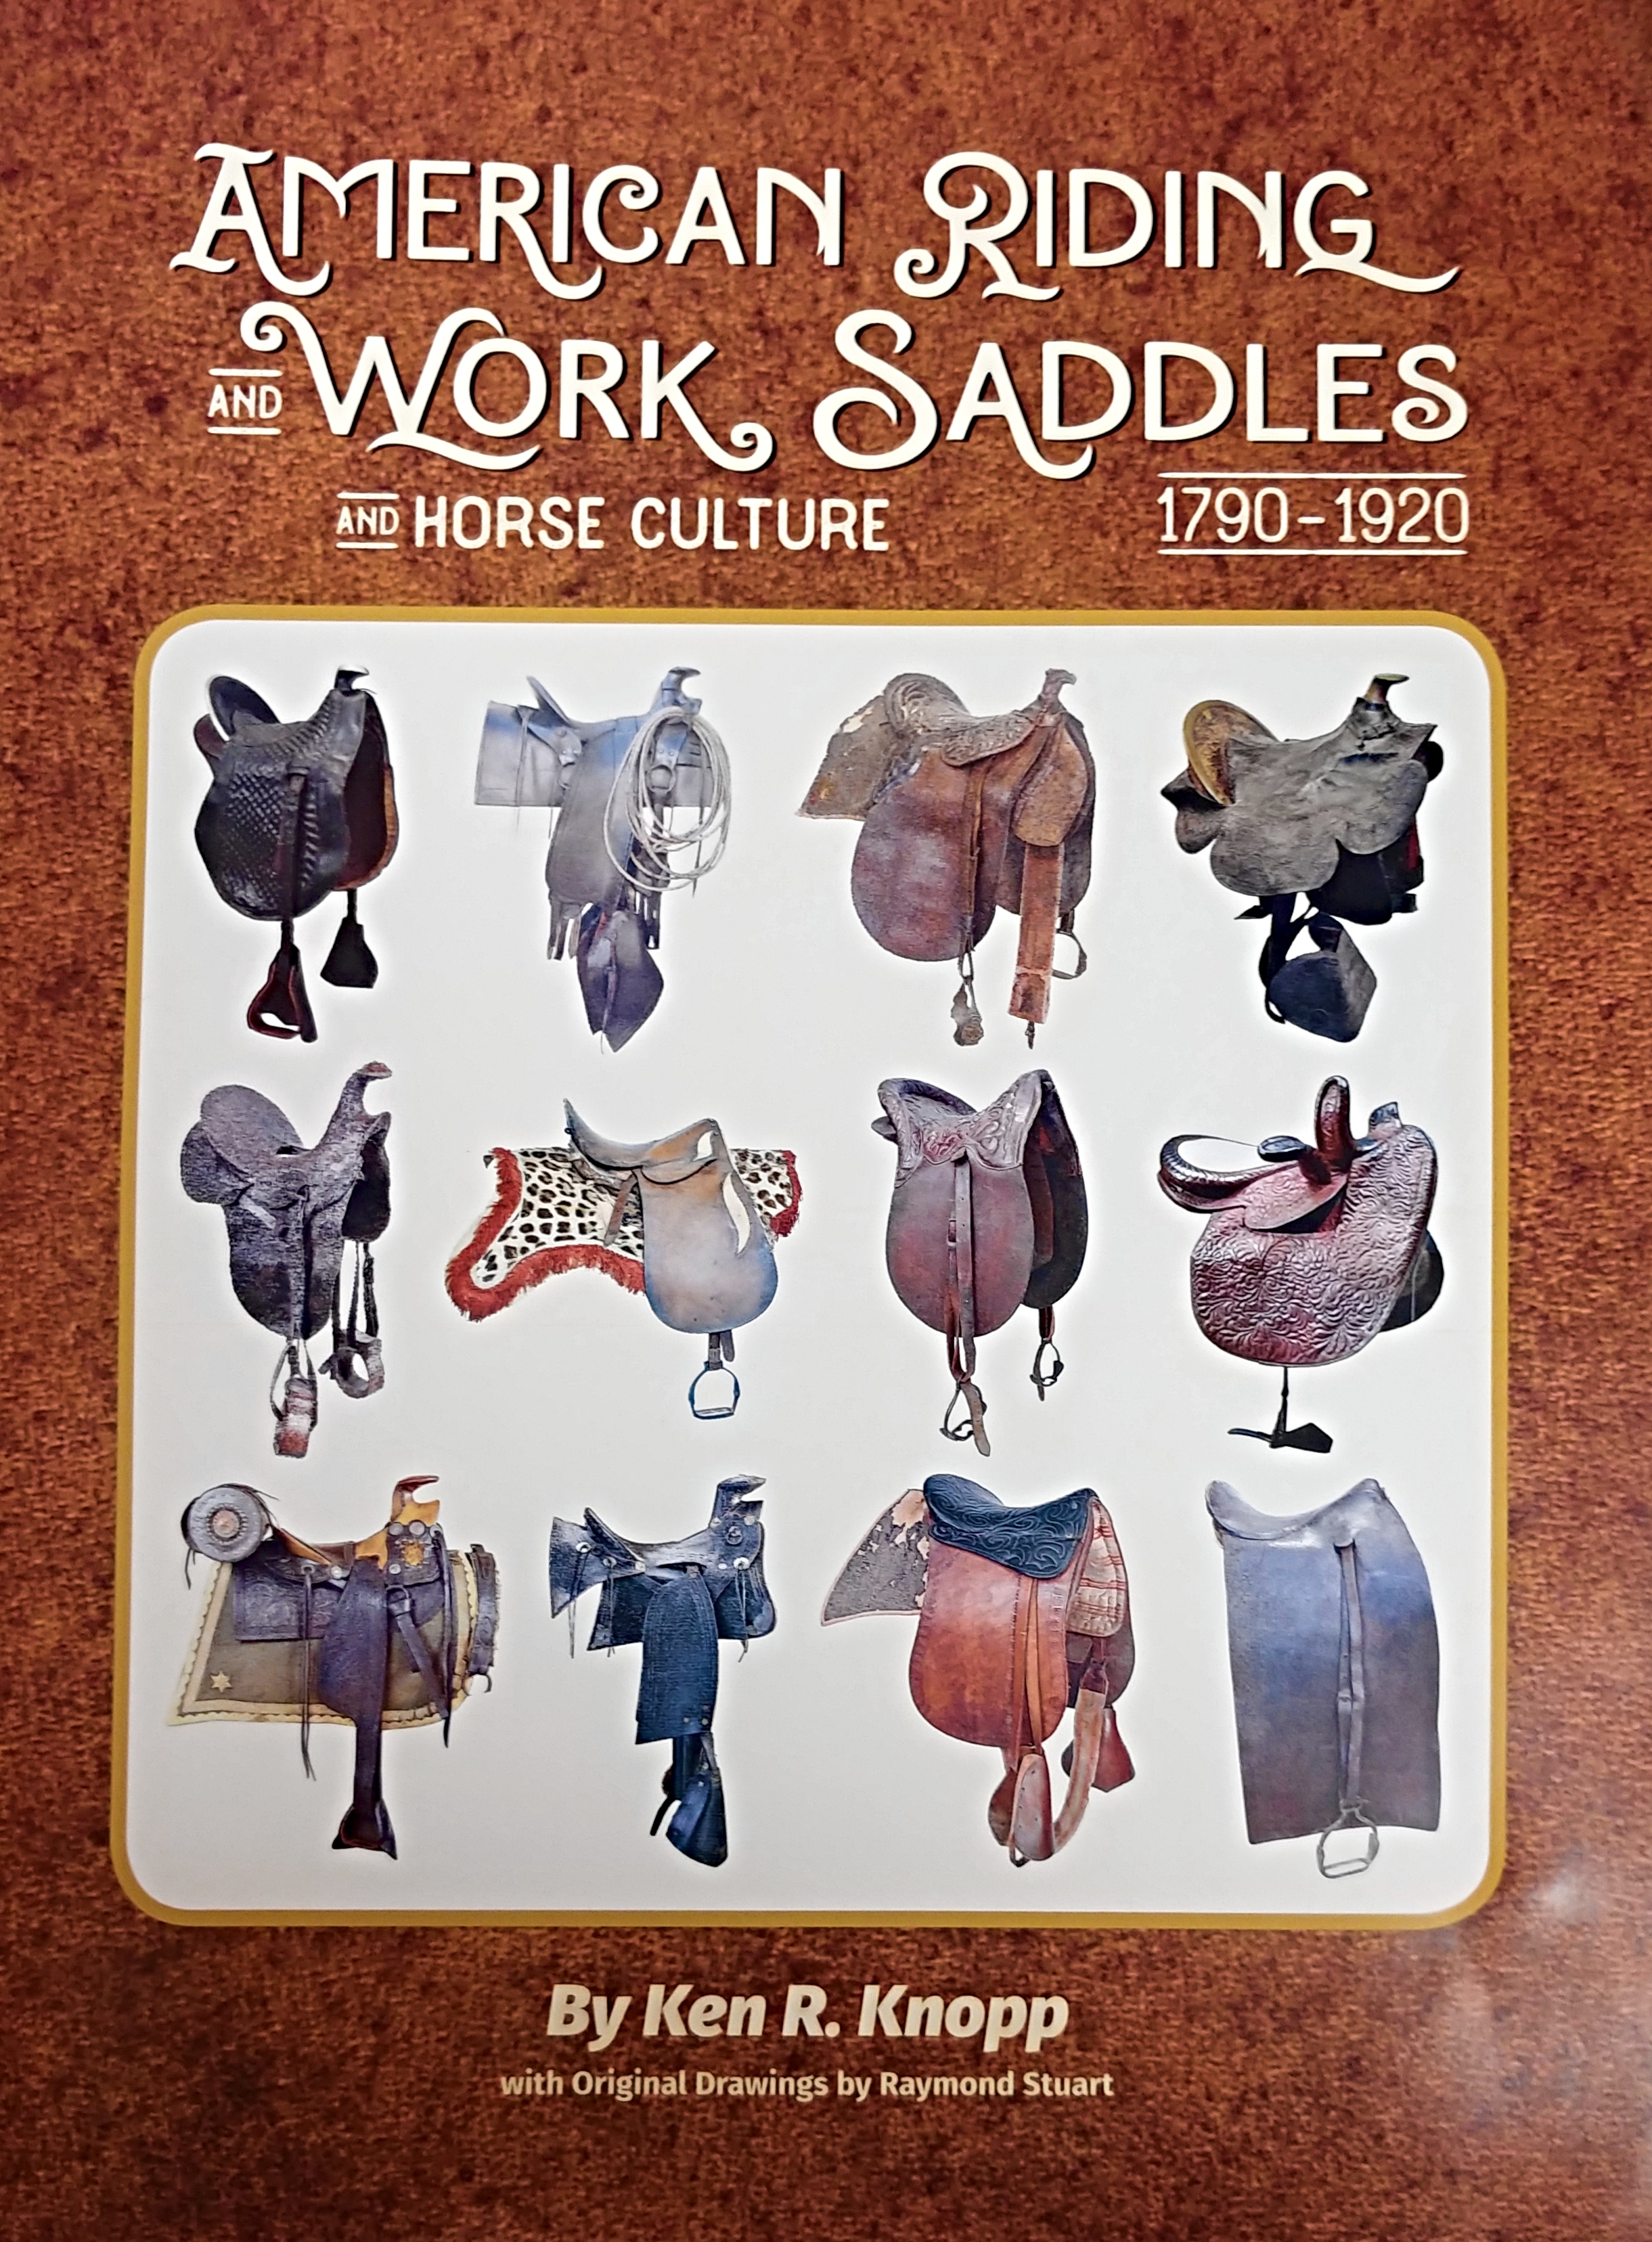 American Riding & Work Saddles & Horse Culture, 1790-1920